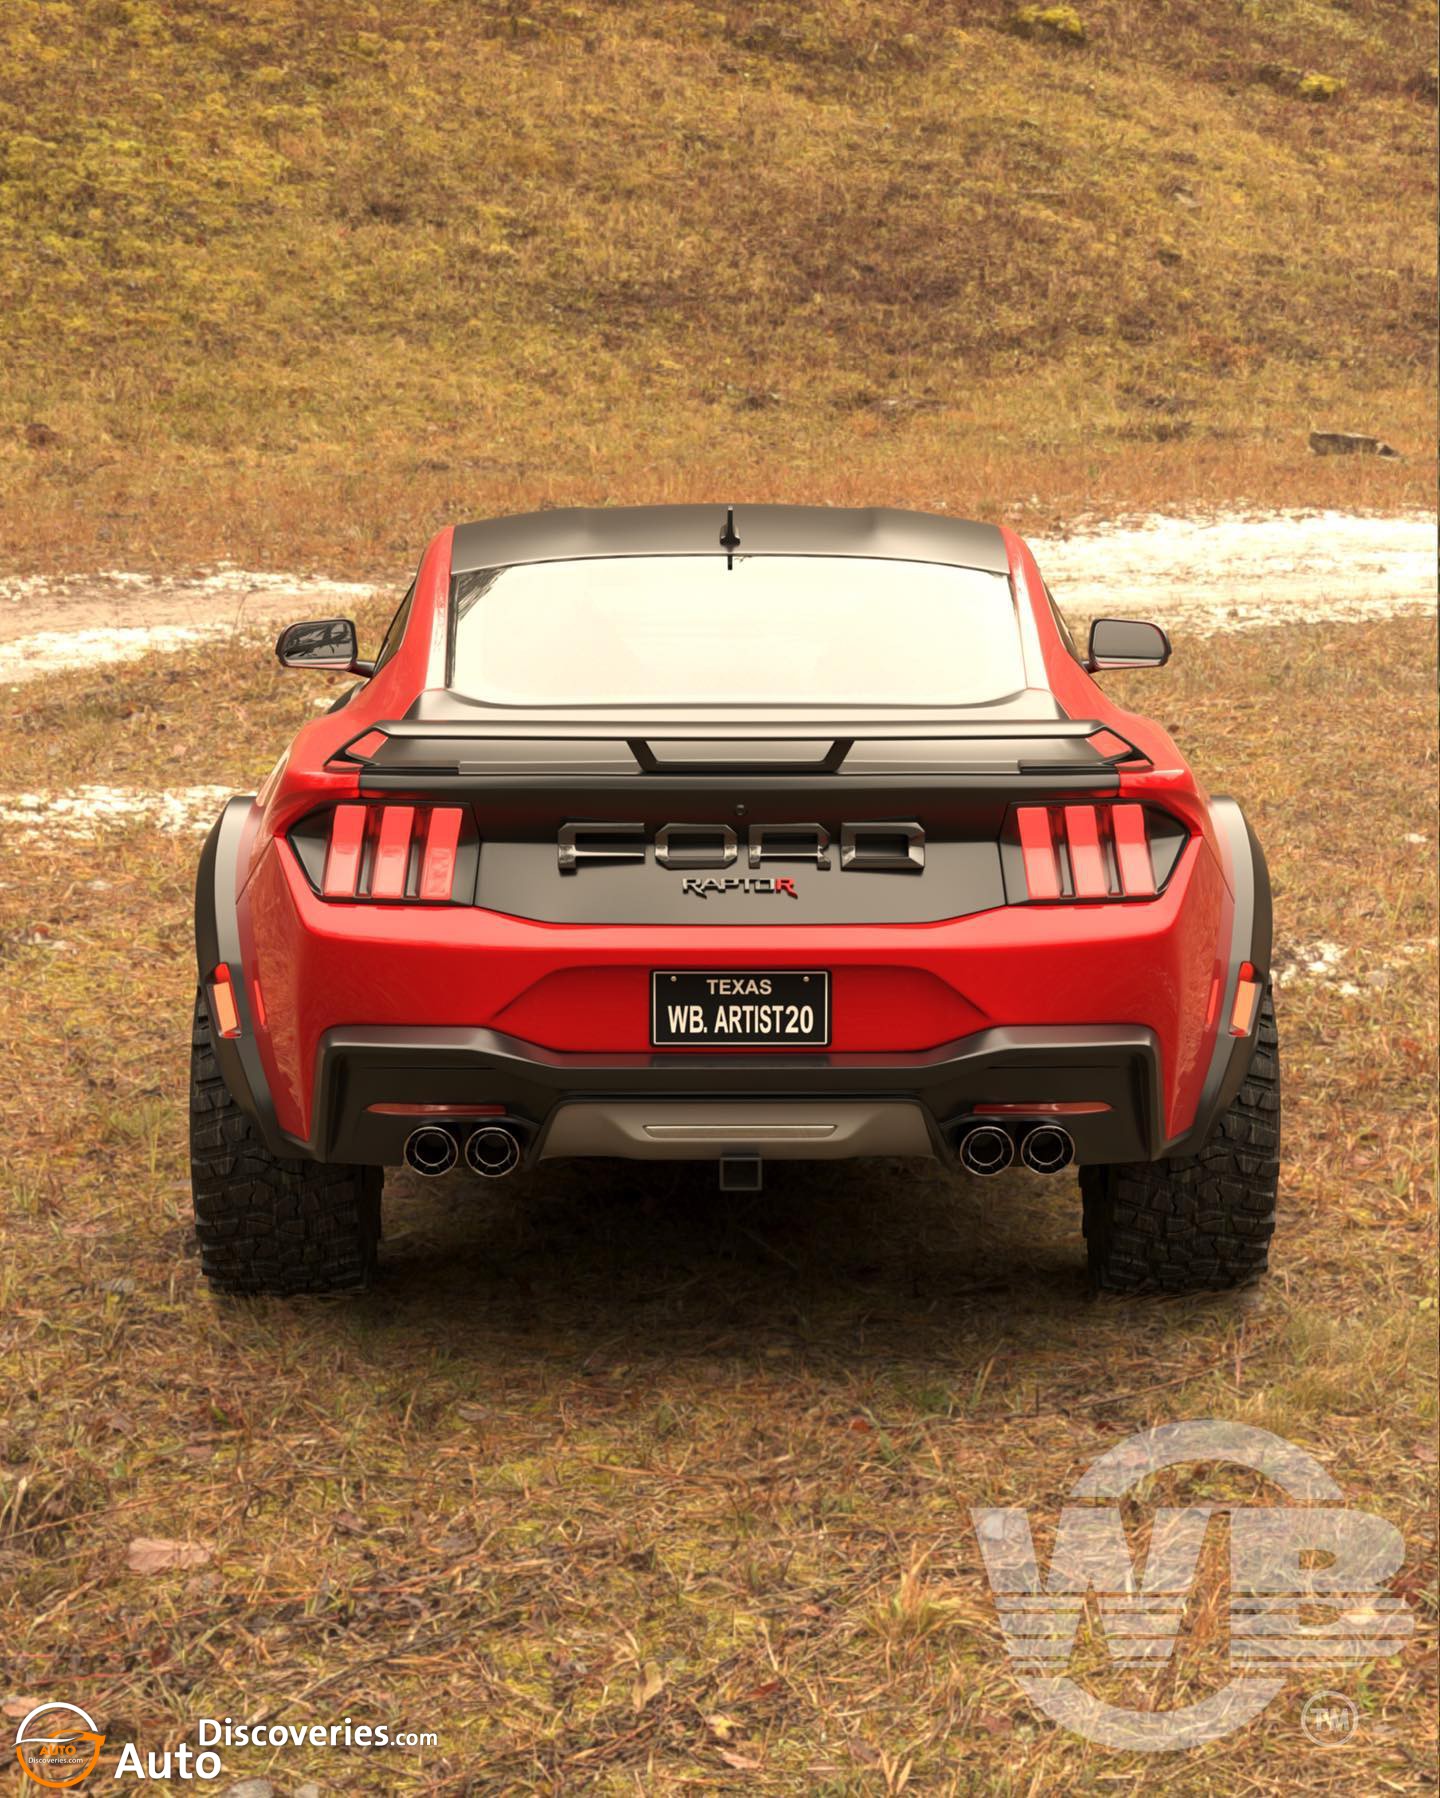 2024 Ford Mustang Raptor R Concept Is An off-road Version Of The Shelby  GT650 - Auto Discoveries